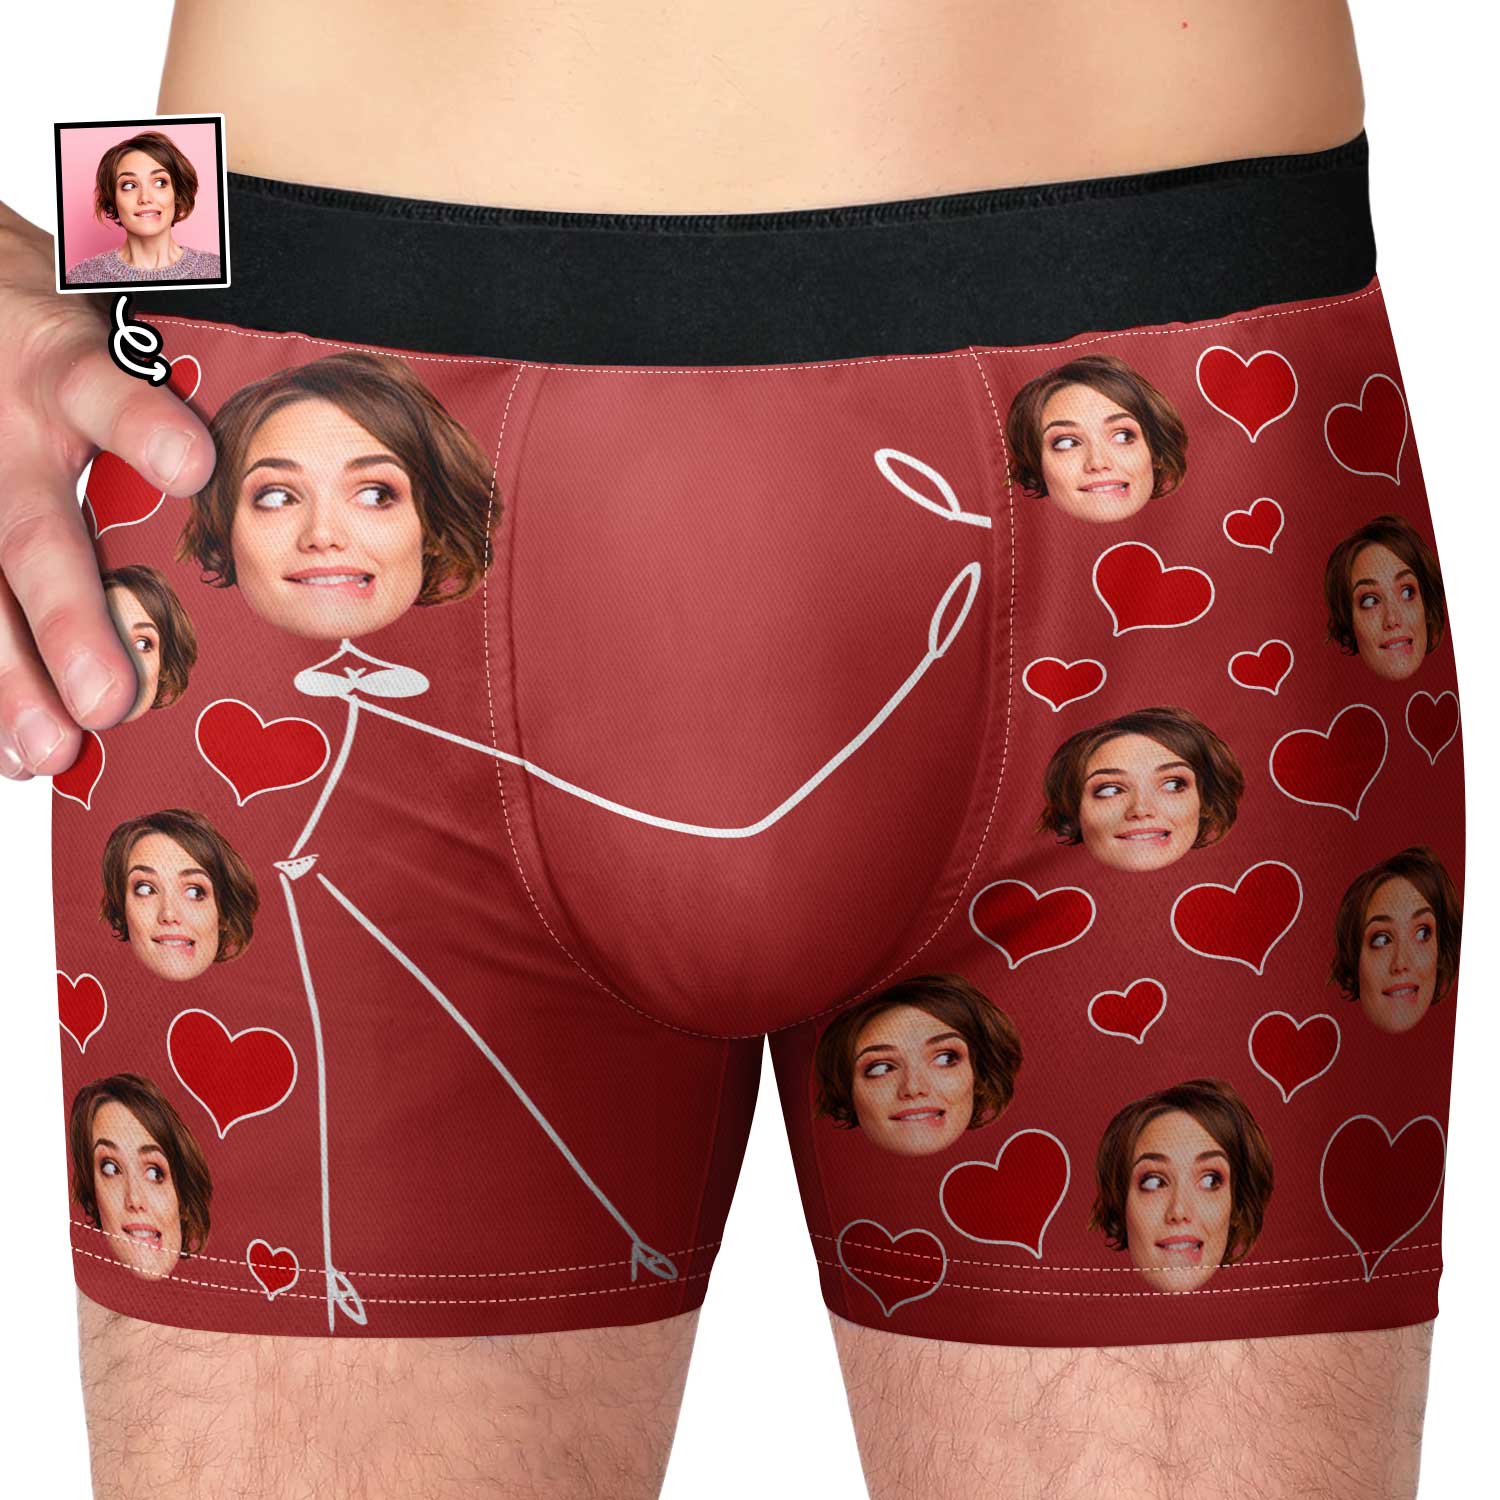 Personalized Boxer Briefs Custom Face Underwear, Men's Underwear Photo Boxer  Briefs, Valentine's Day Gift for Him/husband, Wedding Gift, 